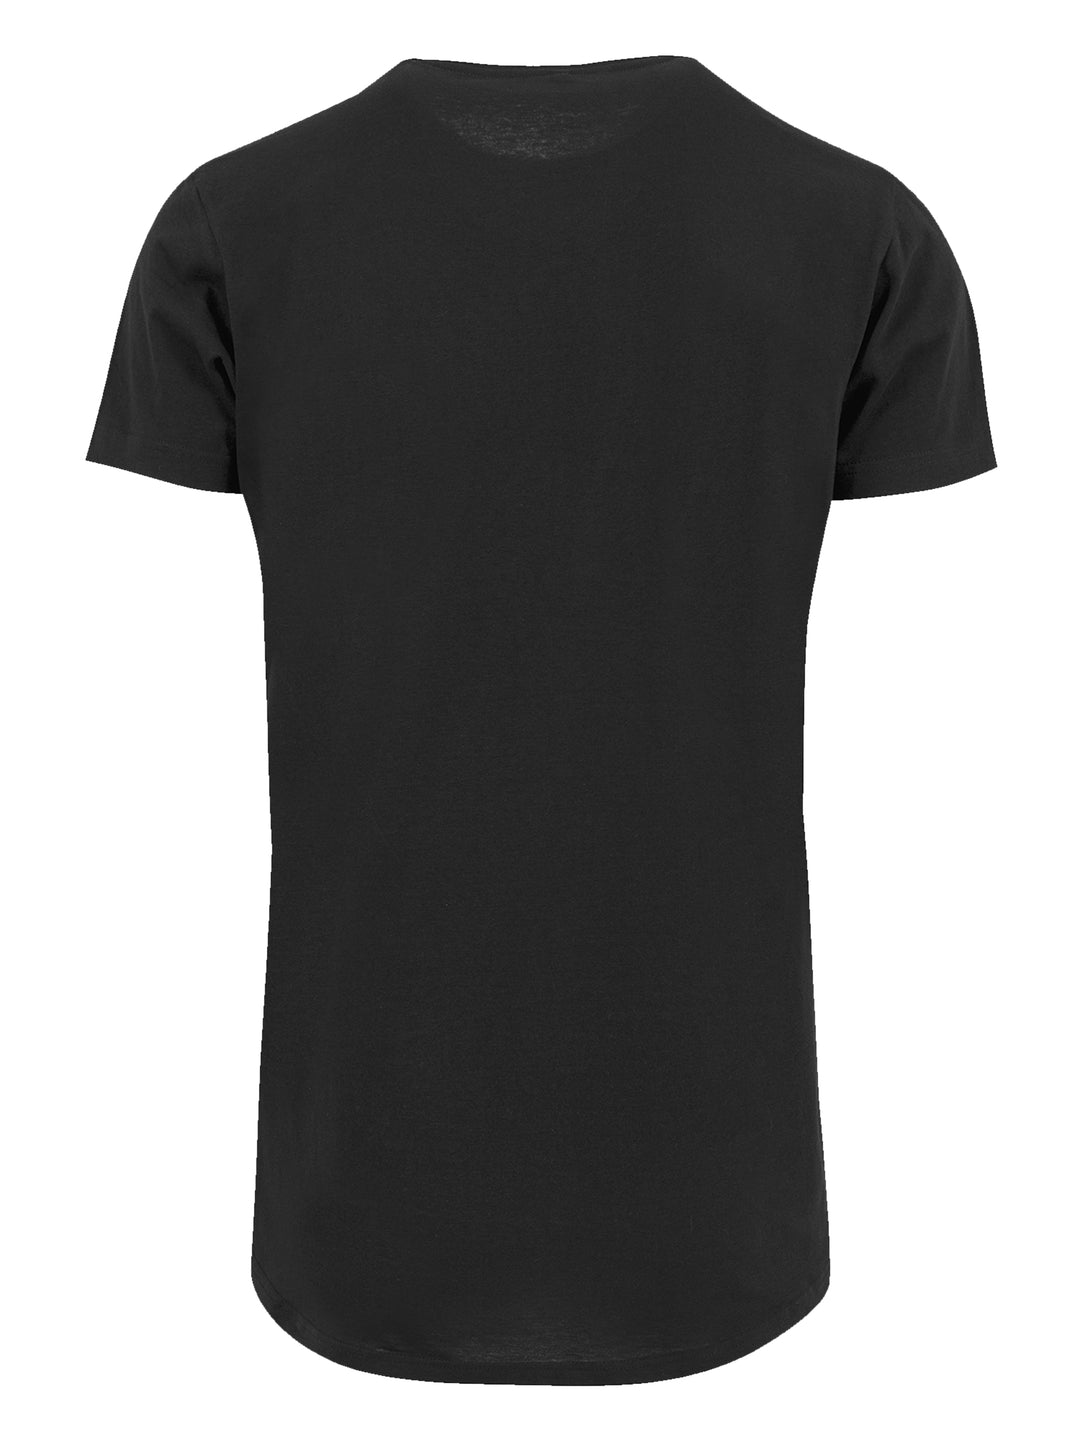 AC/DC Back in Black Shaped Long Tee - The Ultimate Tribute to Rock 'n' Roll